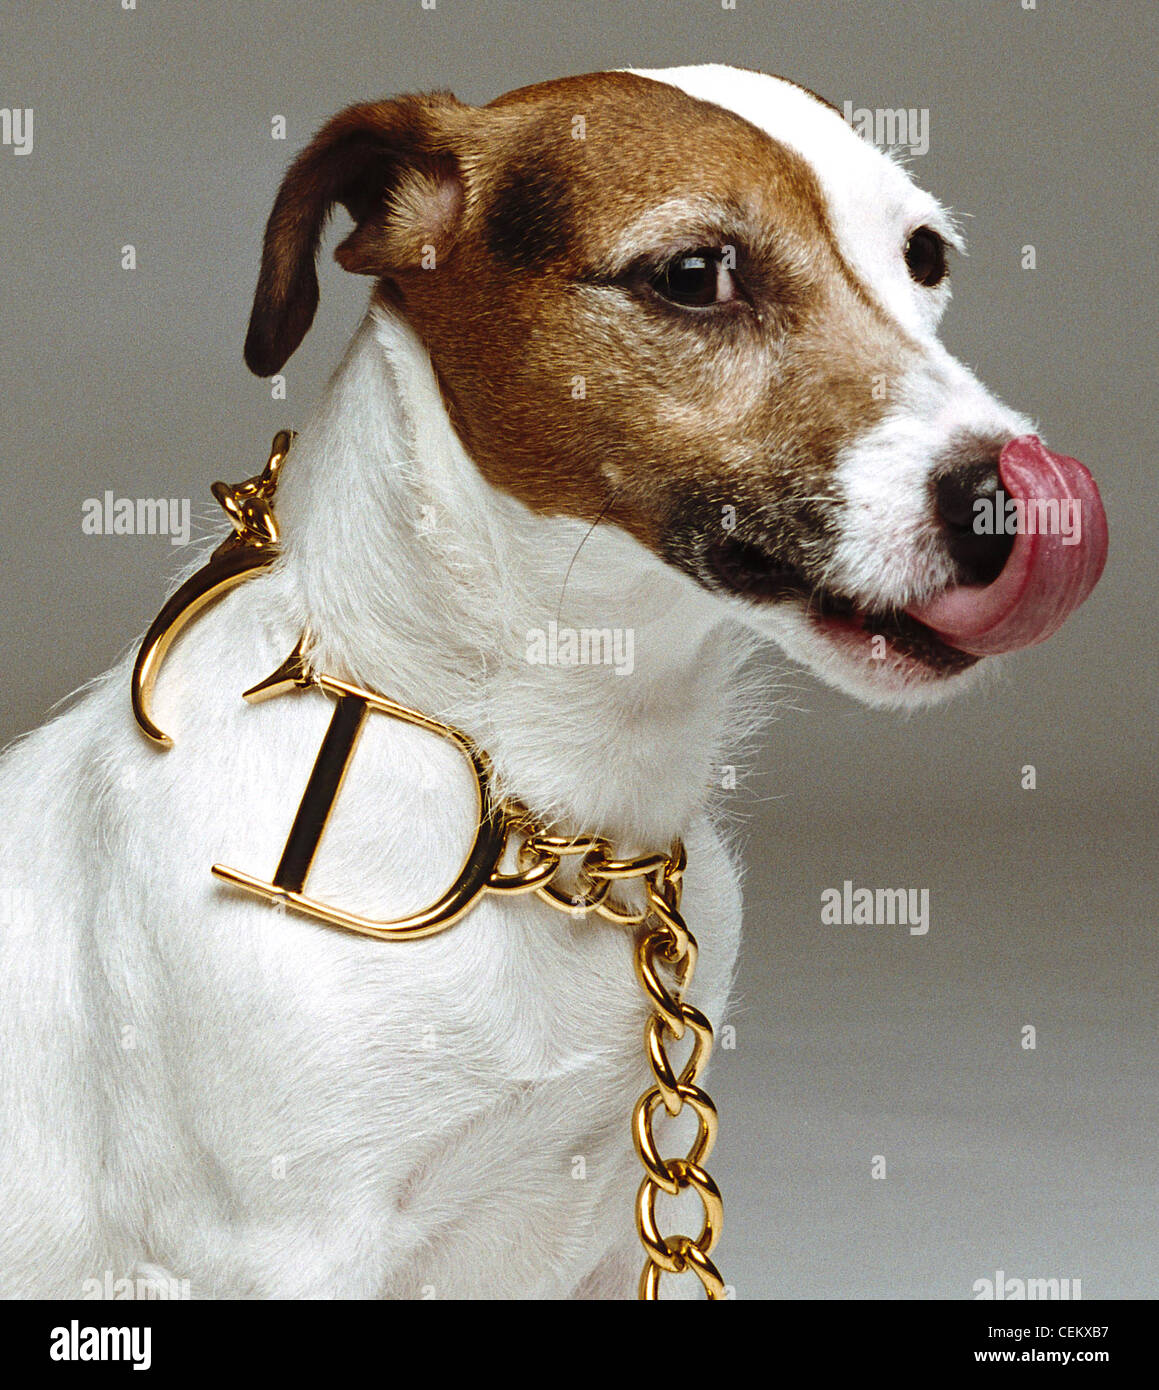 Small dog wearing gold Christian Dichain necklace Stock Photo